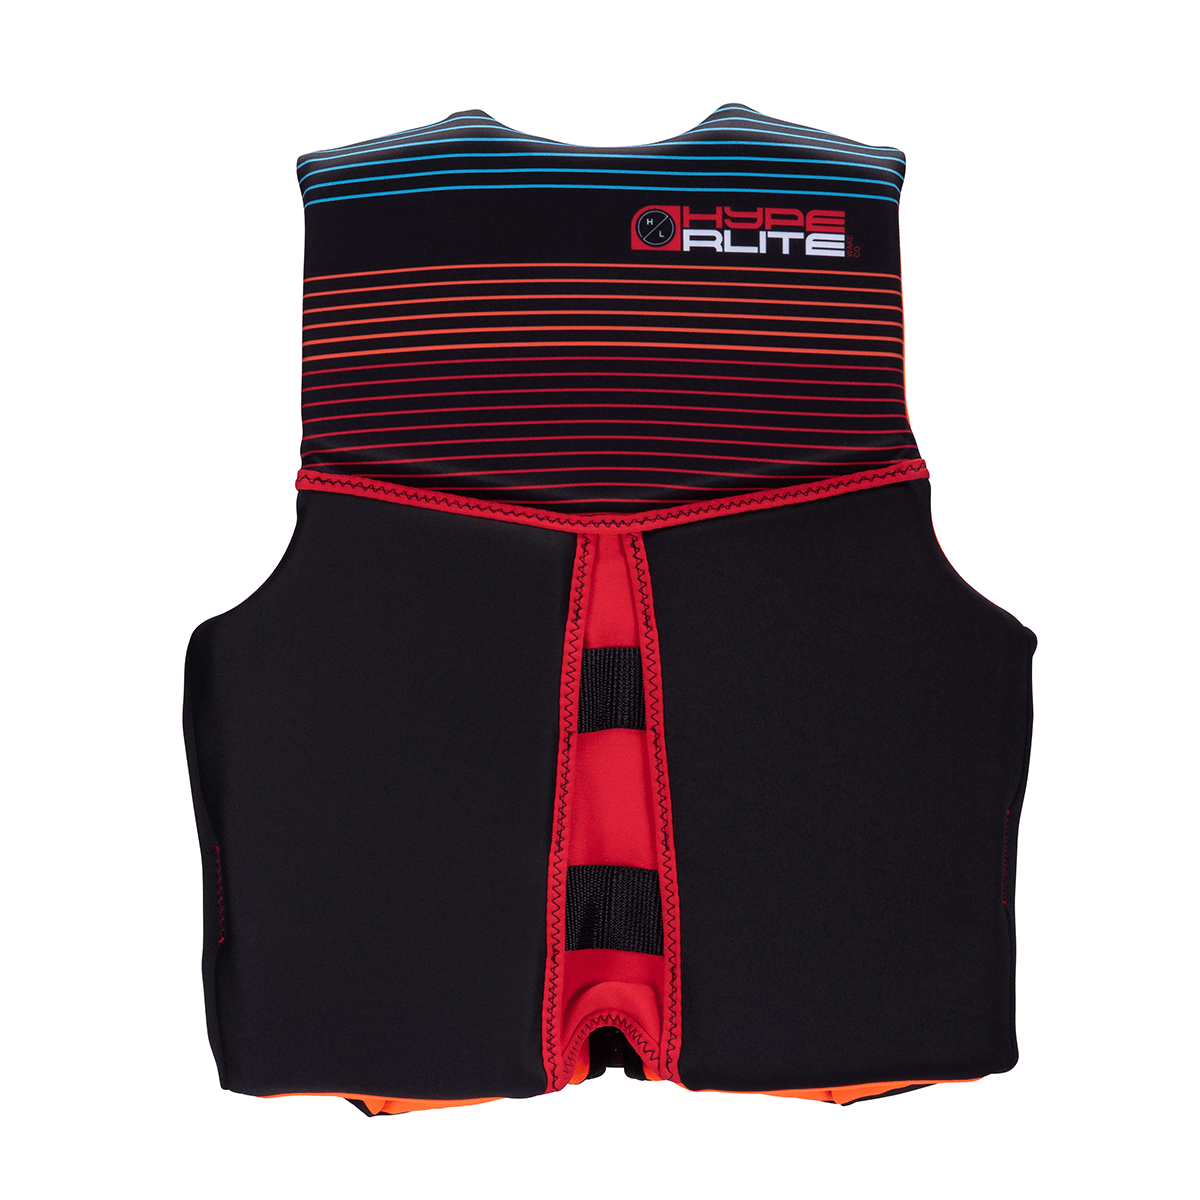 Hyperlite Boy's Youth Indy CGA Life Jacket in Black/Red - BoardCo